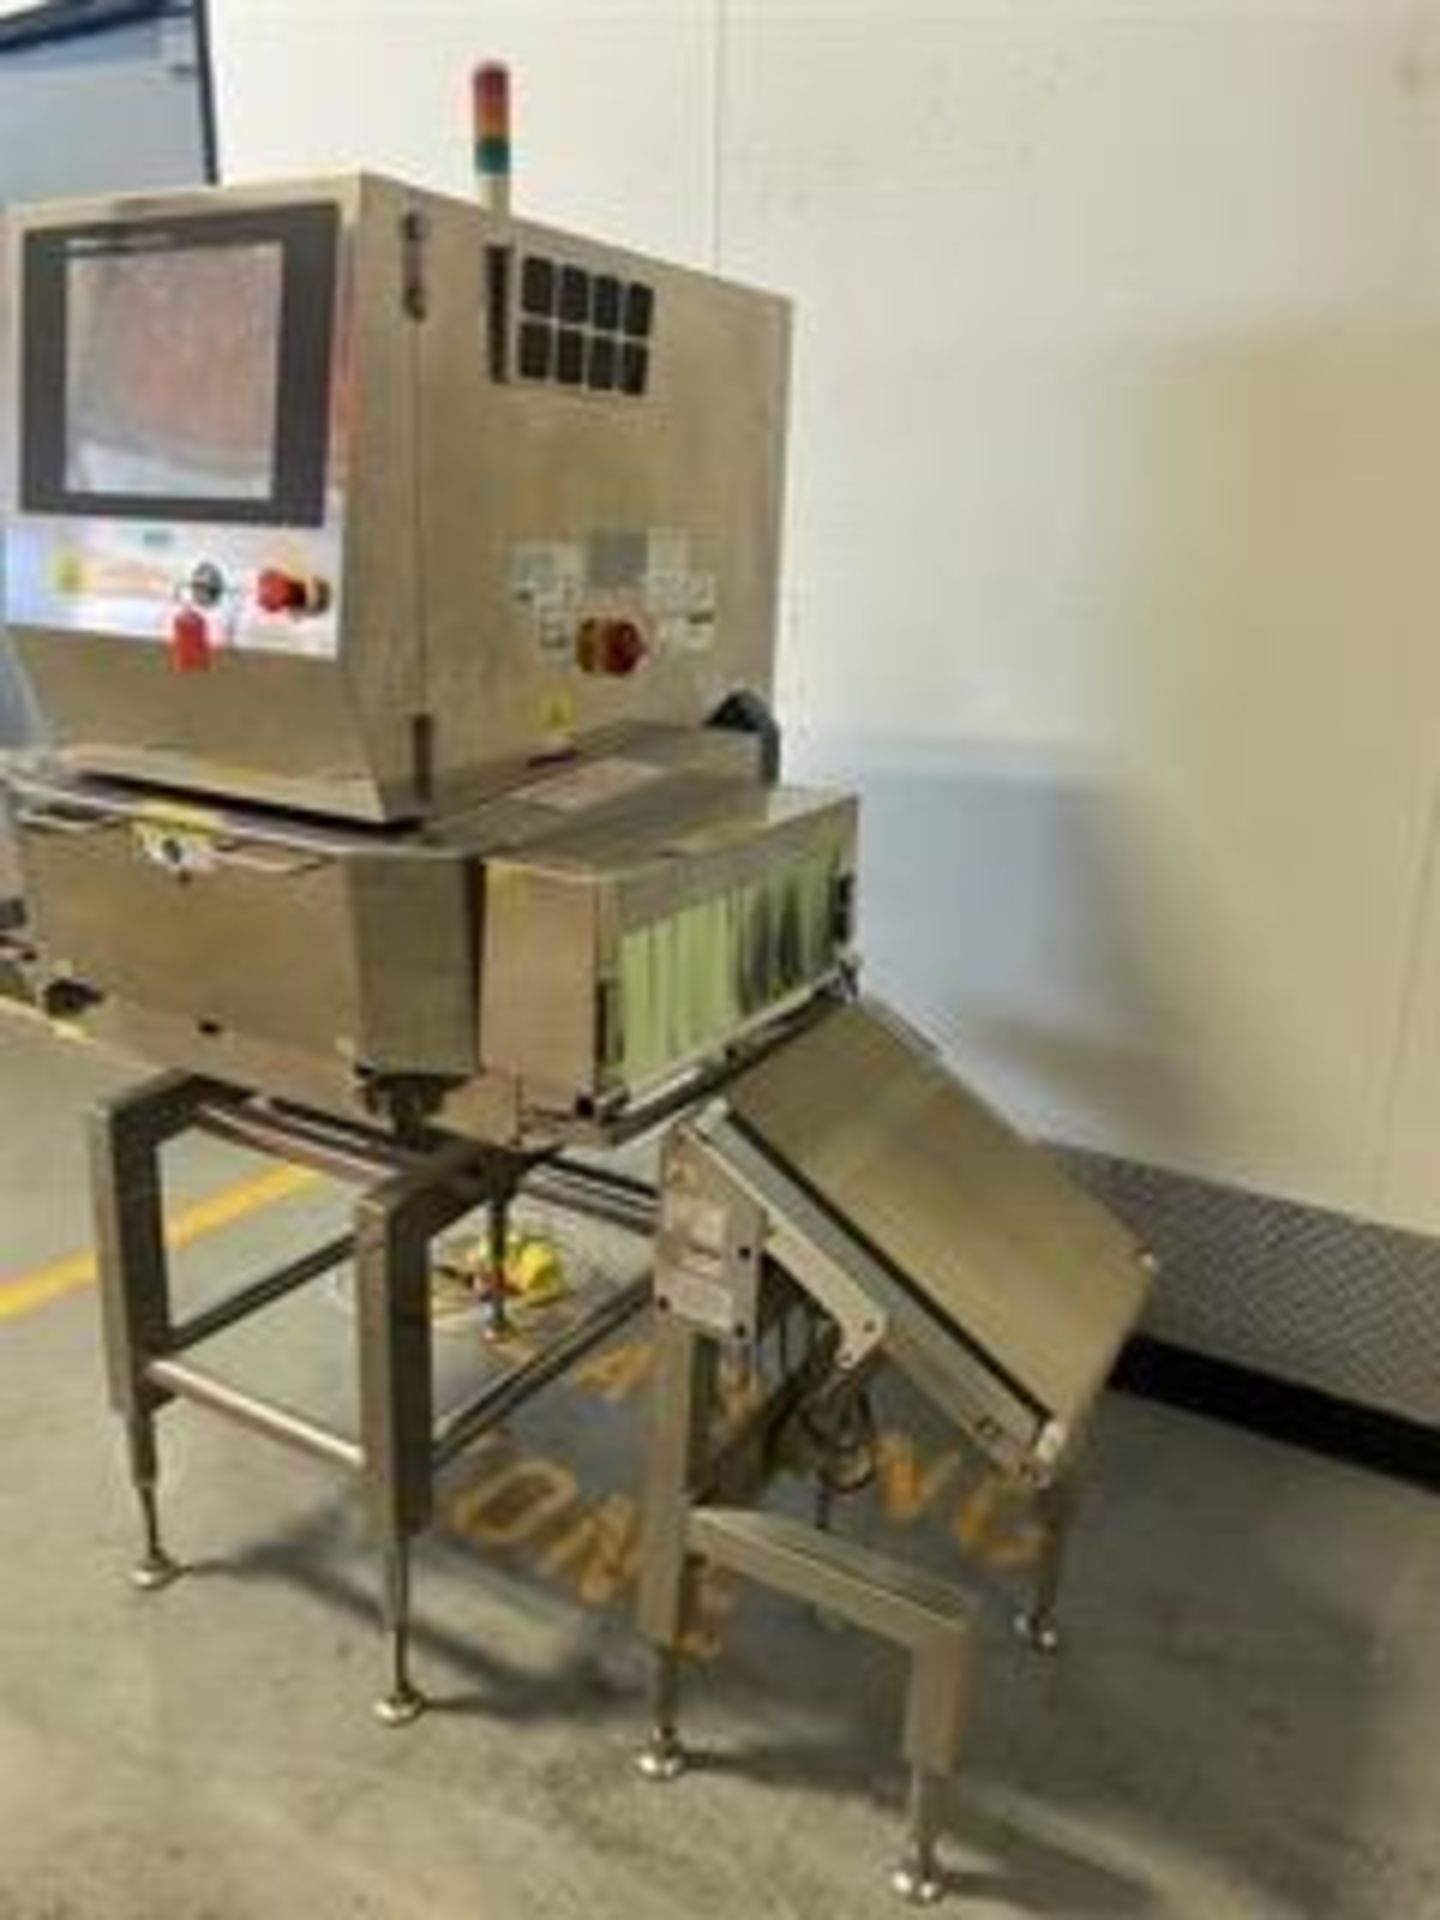 Anritsu X-ray Inspection Machine #4600 w/ Ejection Station - Image 2 of 4